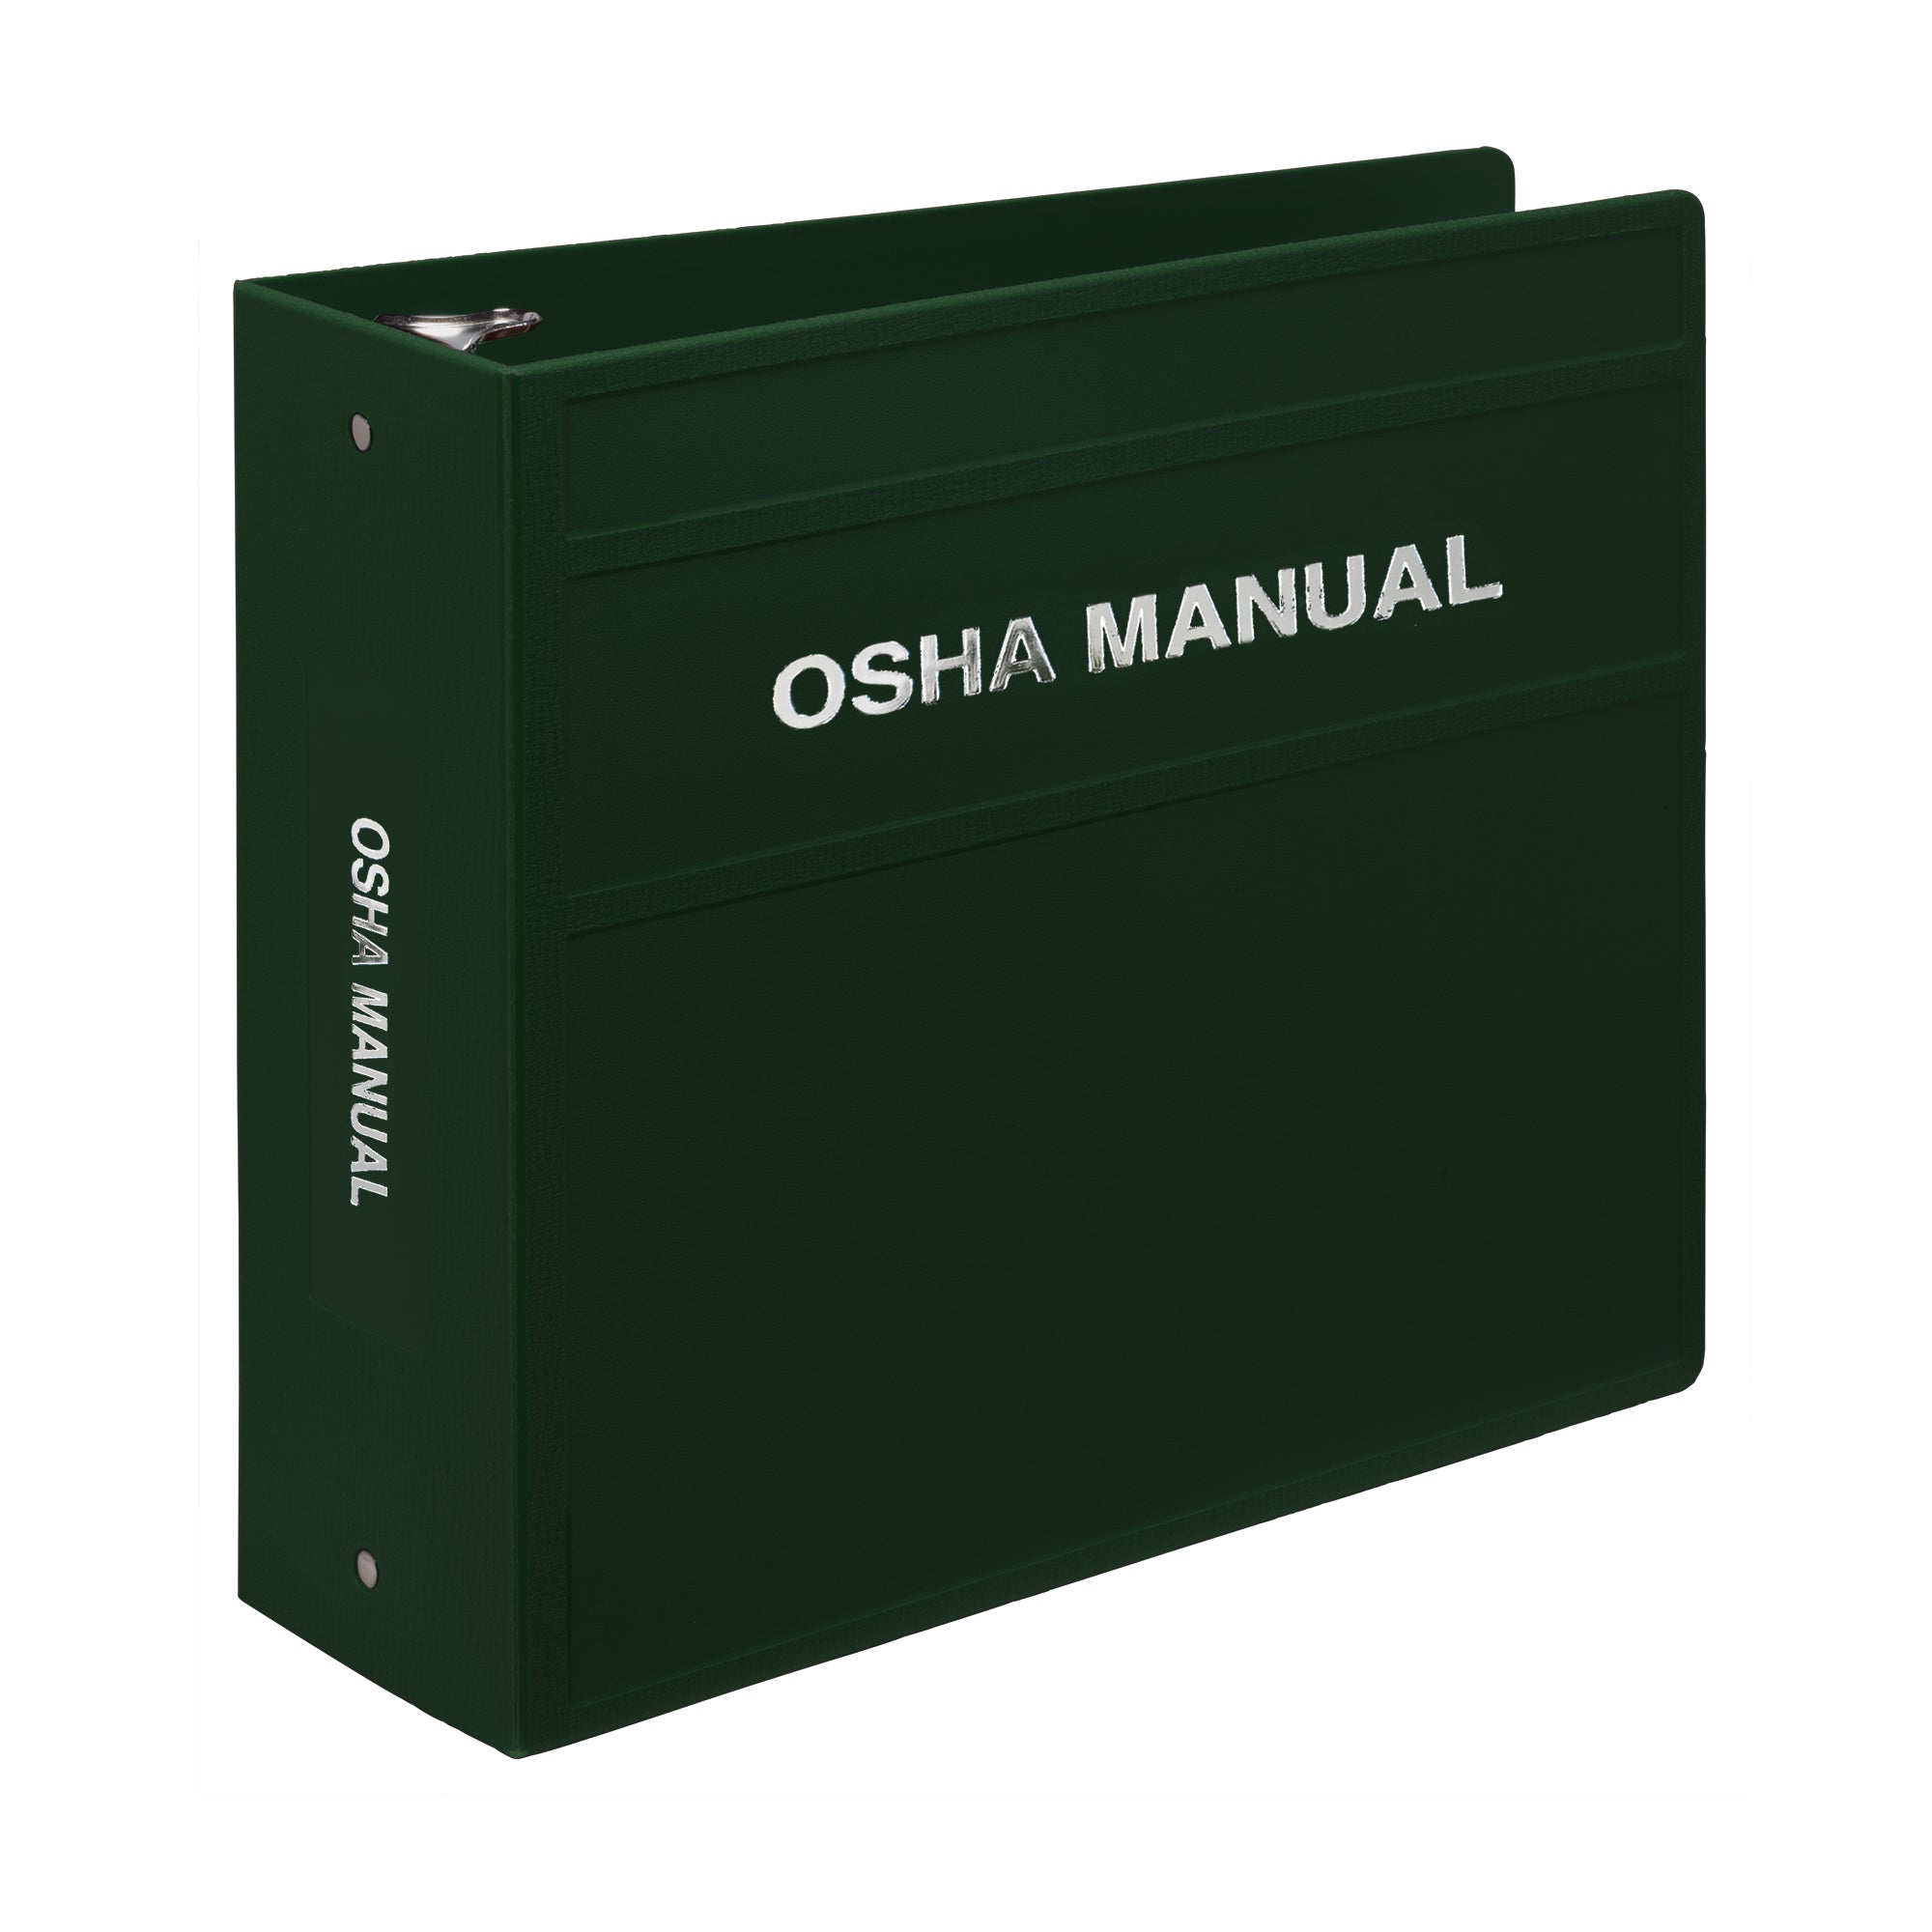 Heavy Duty 3-Ring Binder for OSHA Manuals – Side Opening